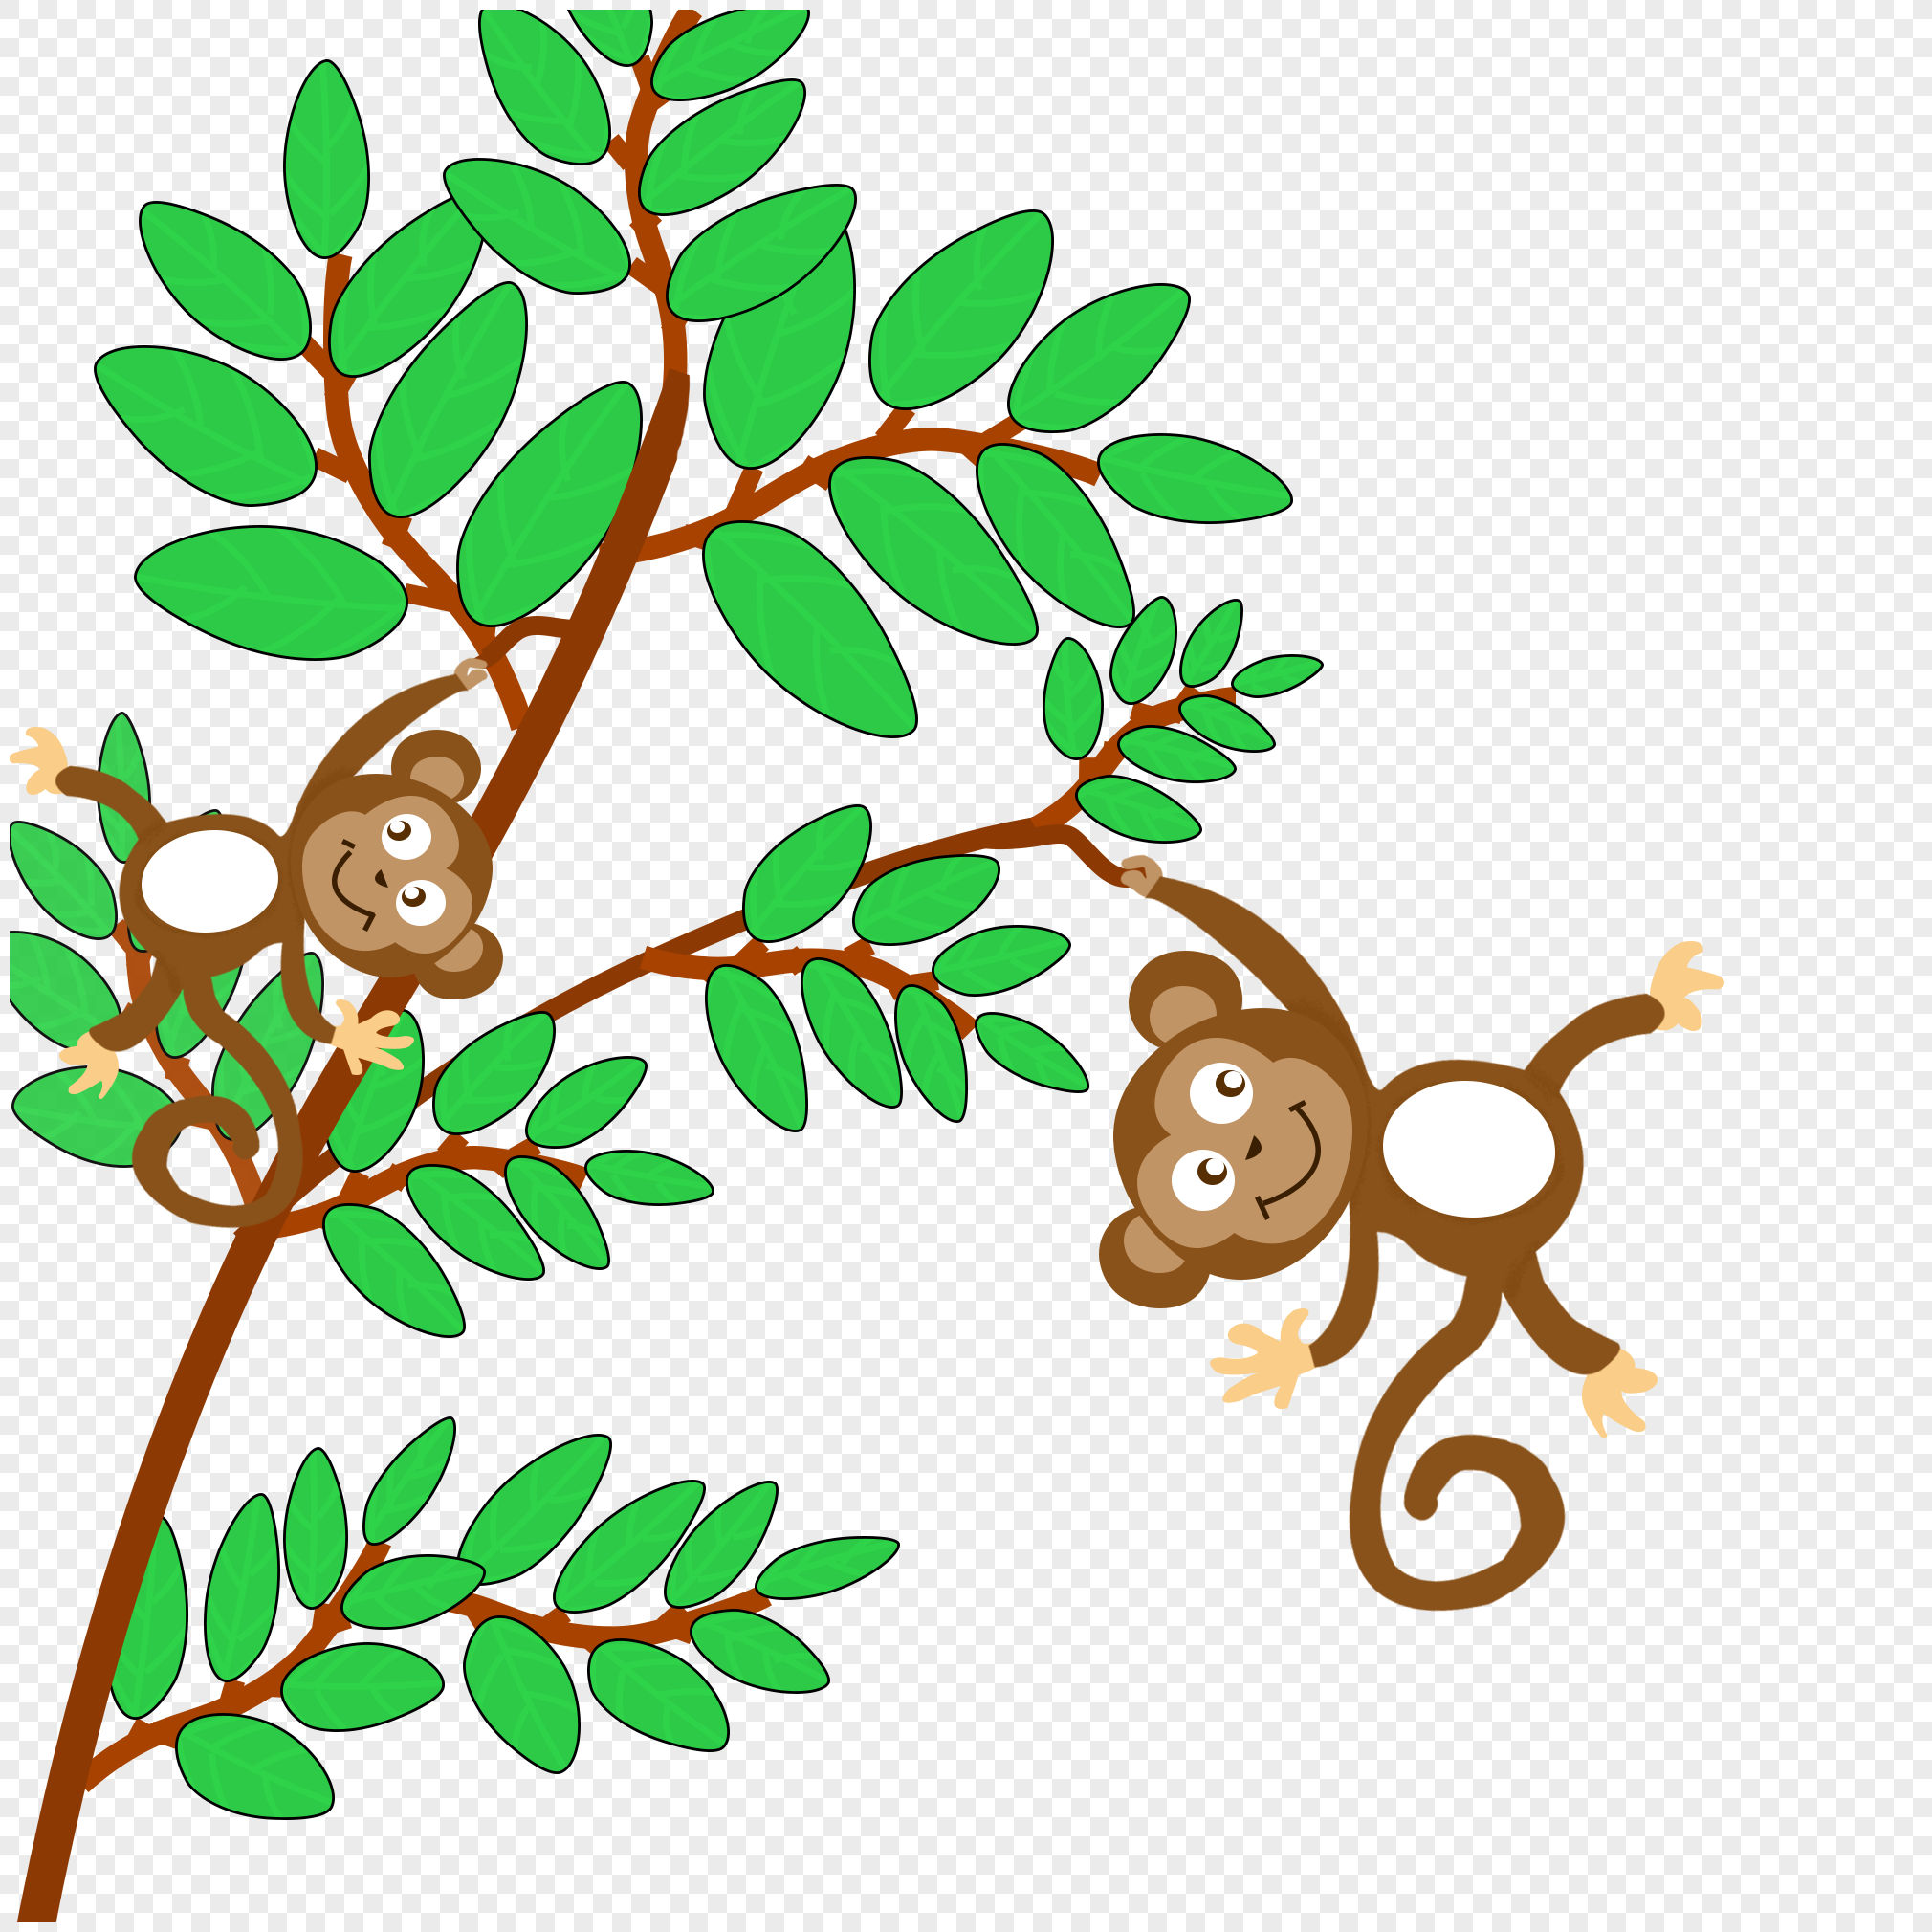 Climbing Trees PNG Images With Transparent Background